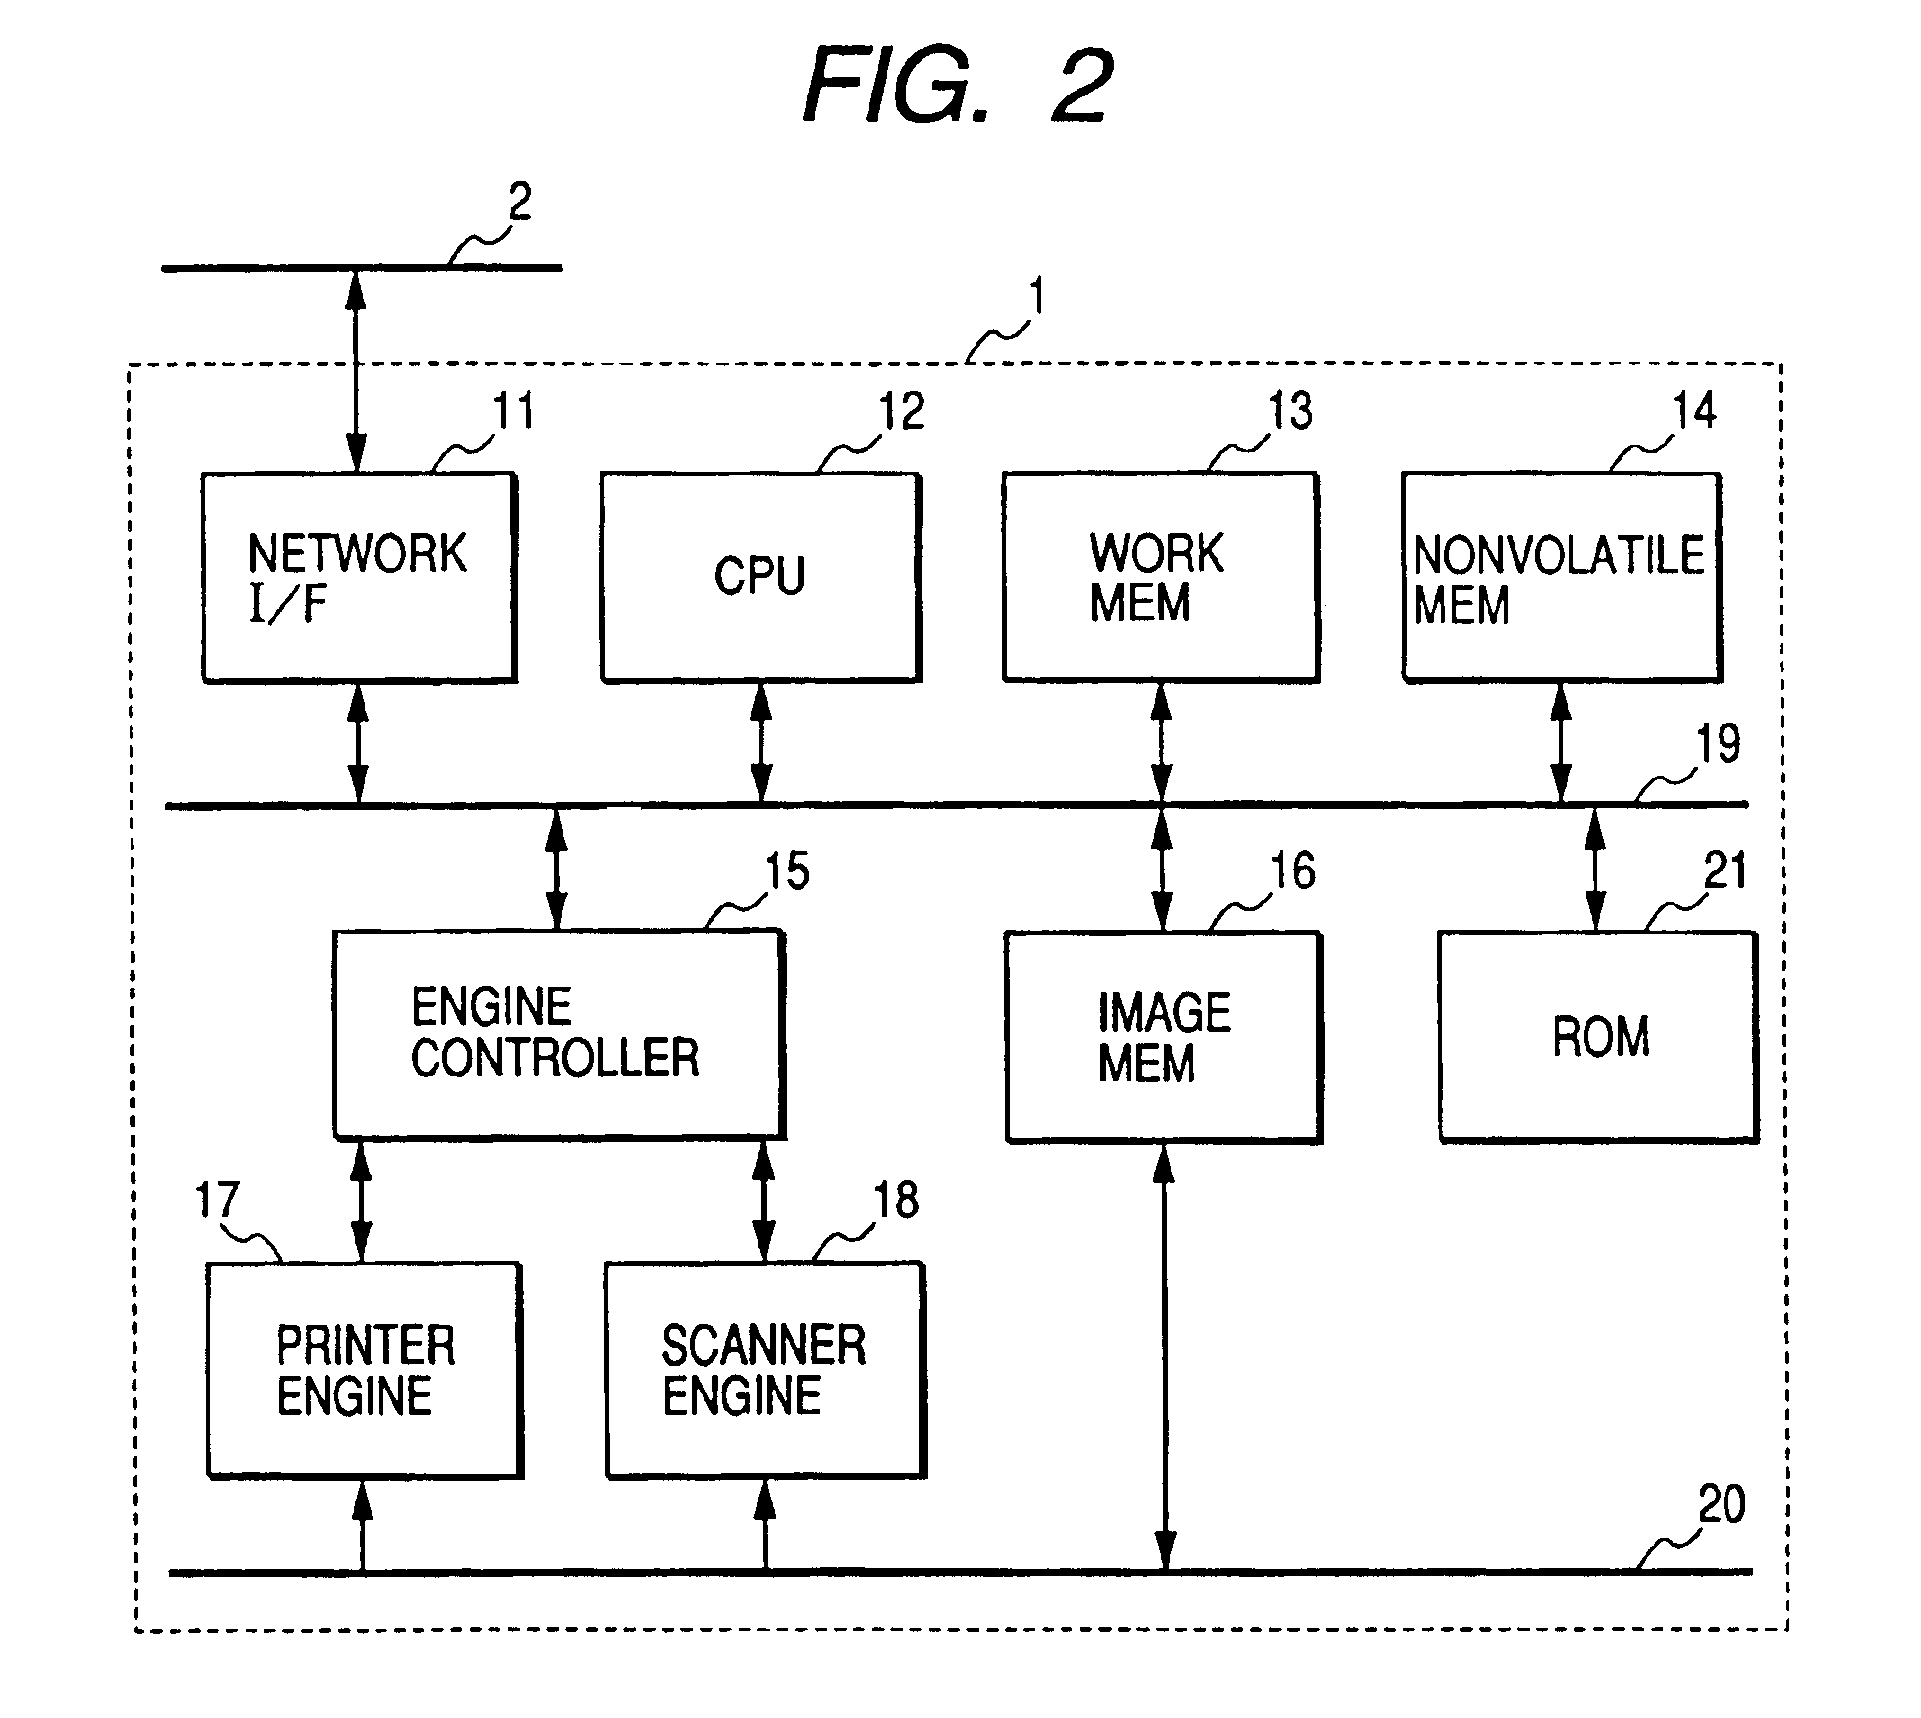 Application of mobile agent in a workflow environment having a plurality of image processing and/or image forming apparatuses